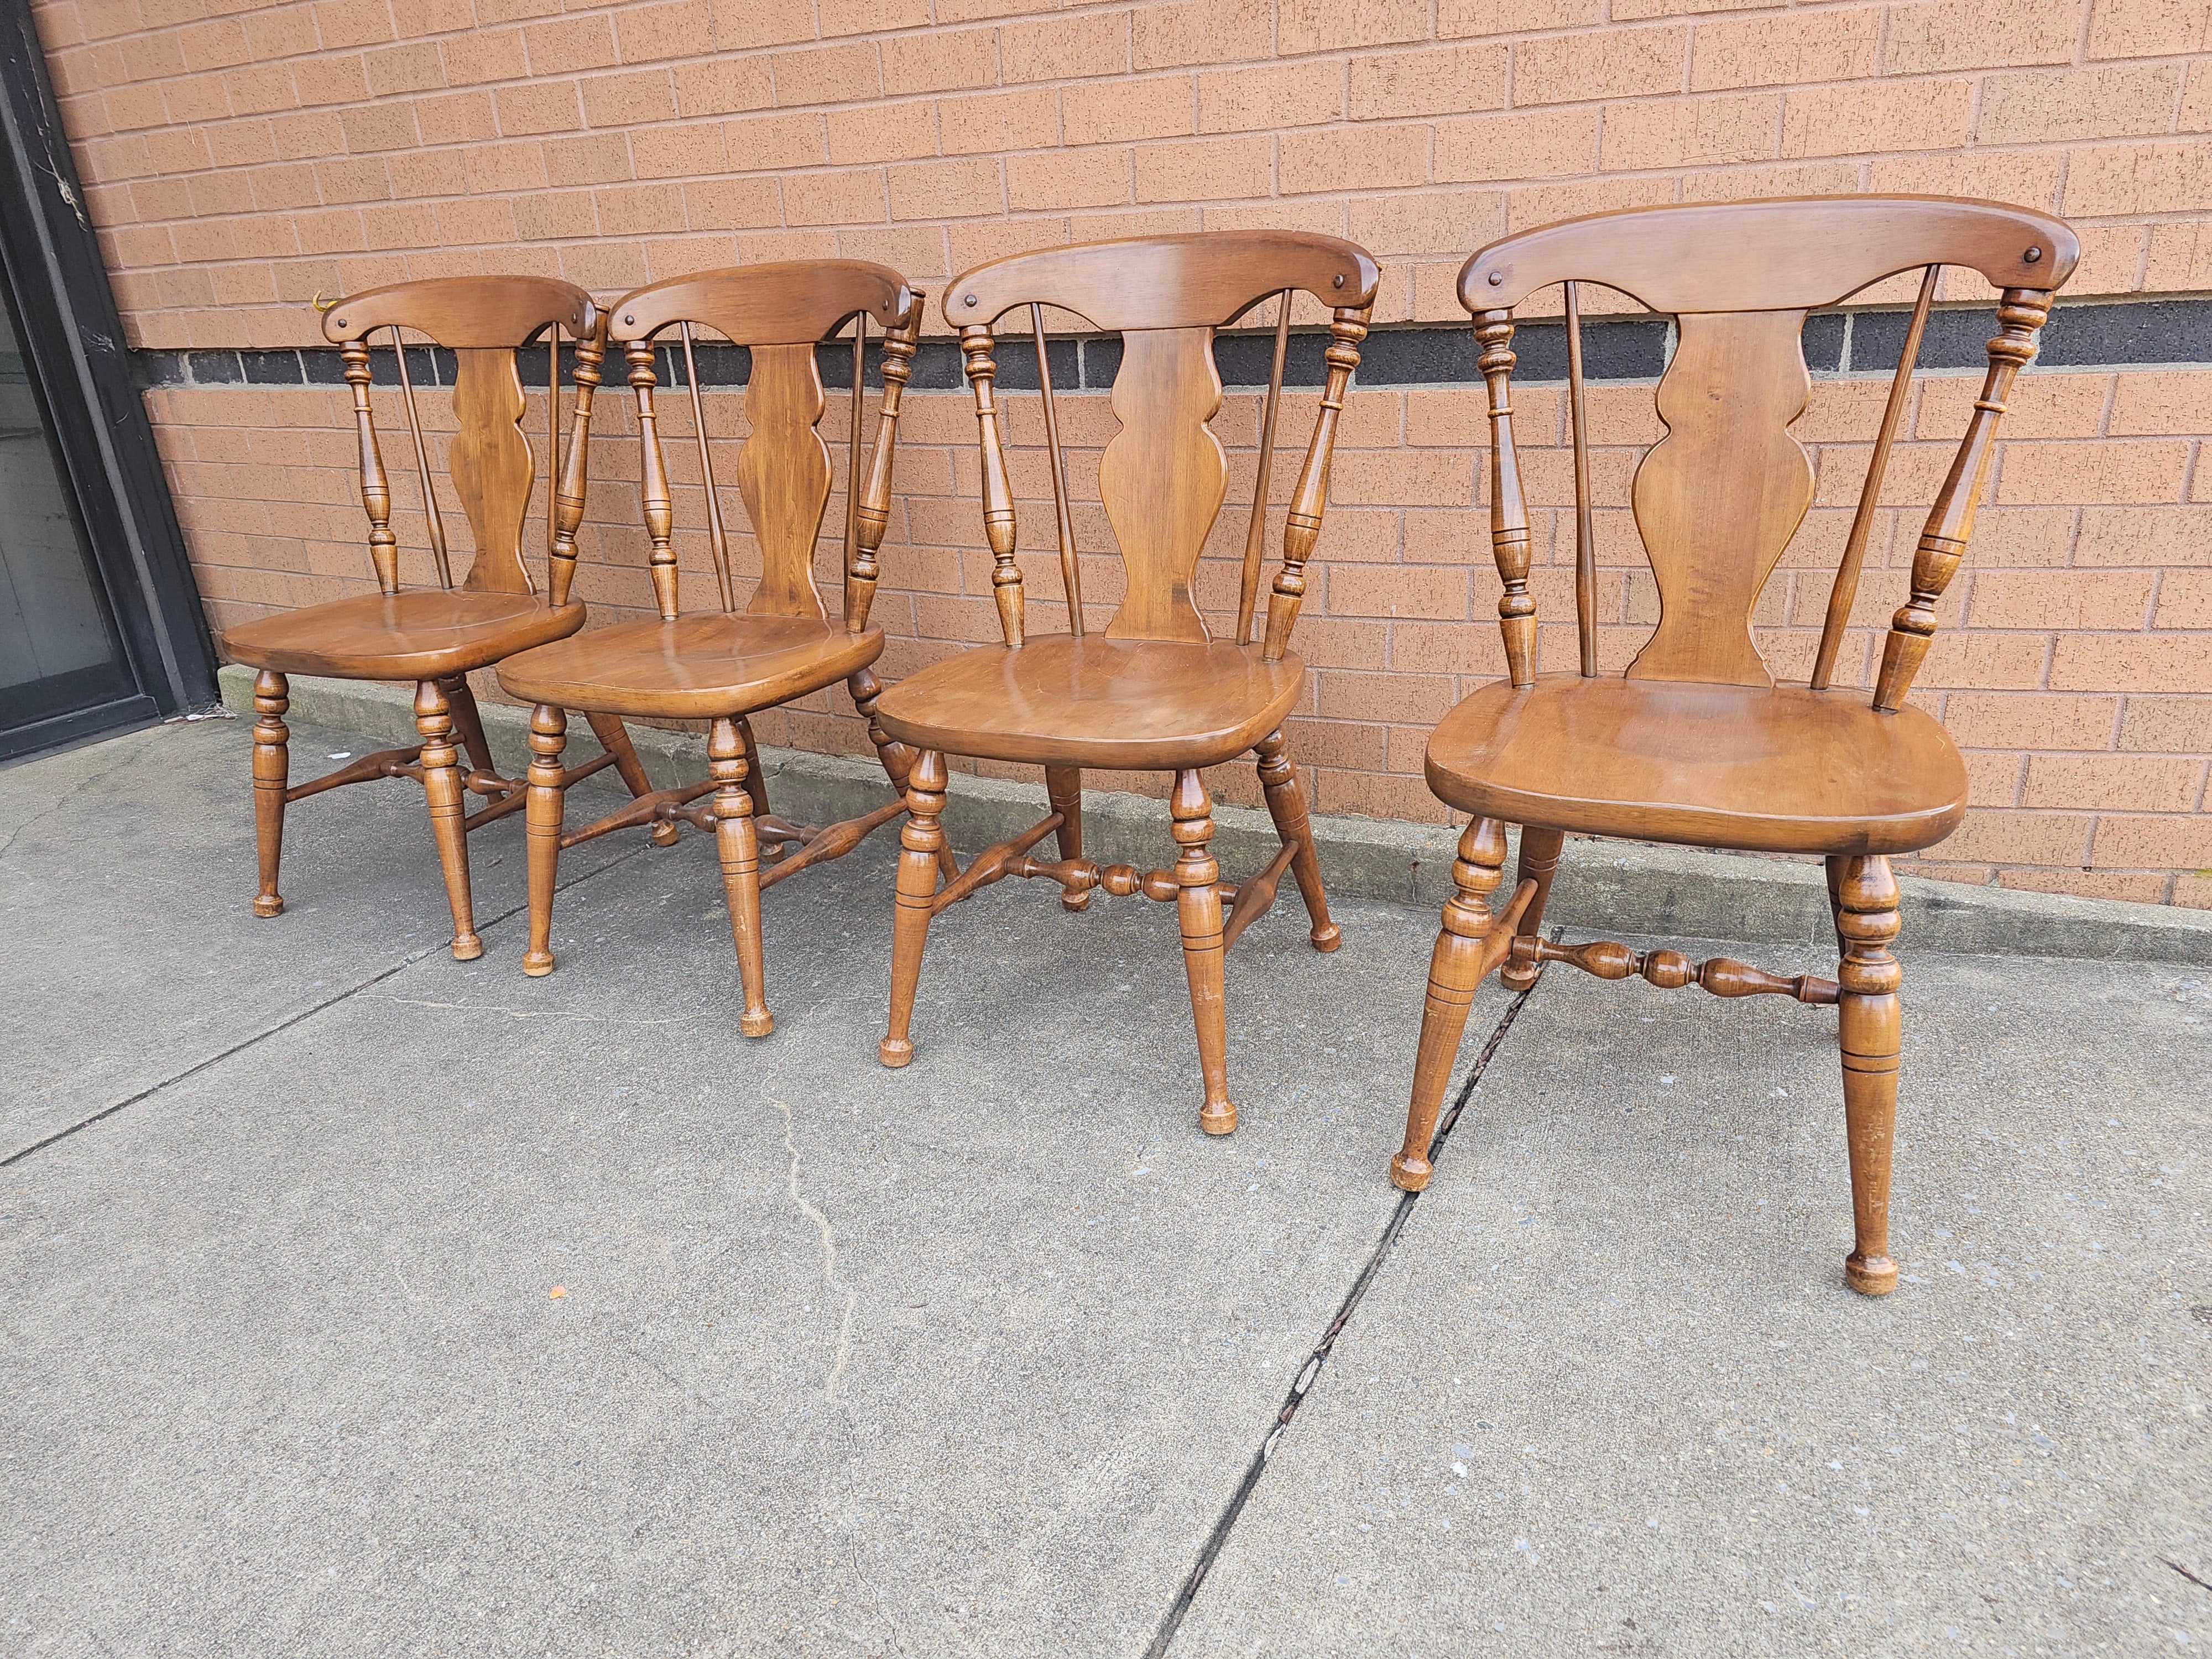 Set of 4 Heywood Wakefield solid Hard Rock Maple Cinnamon Colonial Style Splat Back side Chairs in good vintage condition. 